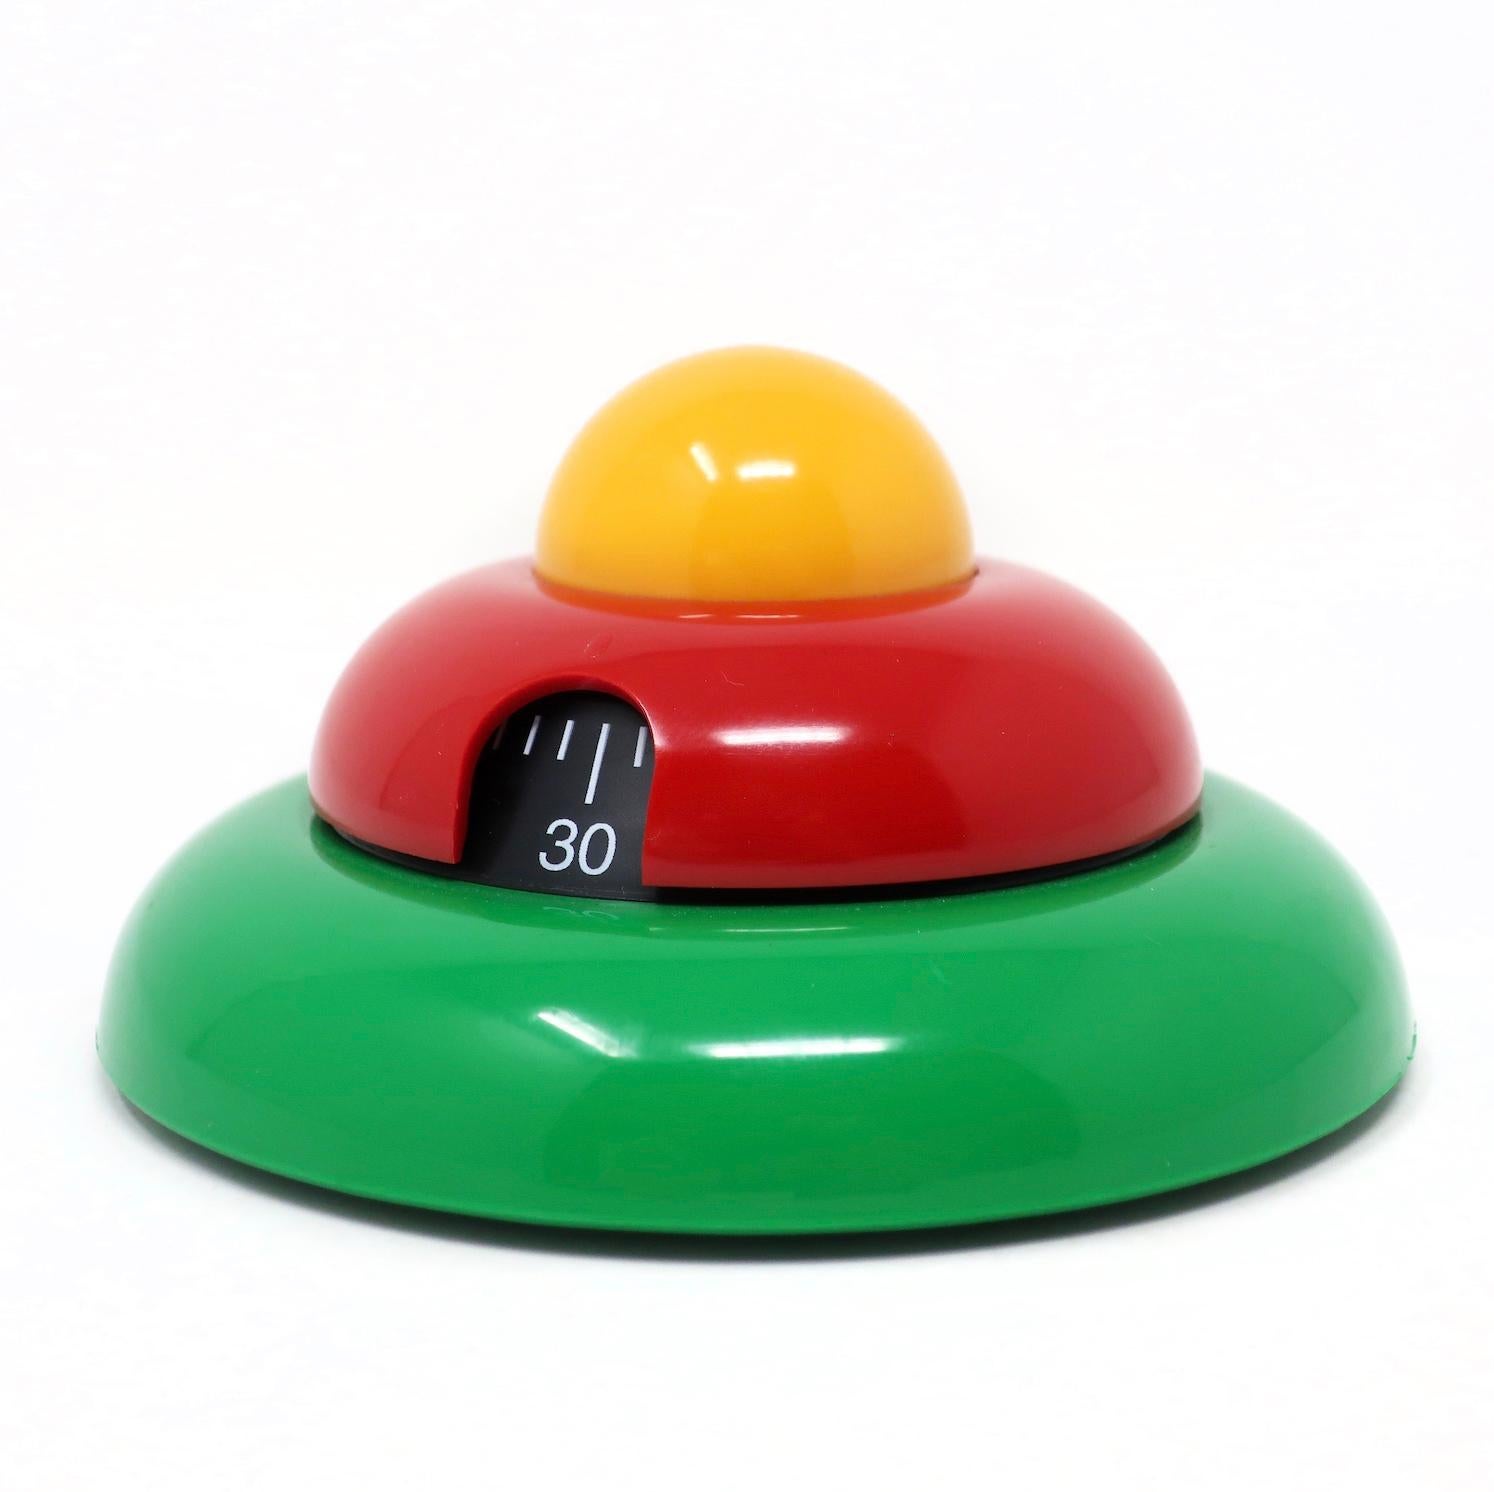 A whimsical Italian postmodern multicolor kitchen timer designed by Roberto Pezzetta for WikiDue. Stacked green, red and yellow discs give it a fun Memphis Milano. Runs for up to 60 minutes.

In very good vintage condition with slight wear